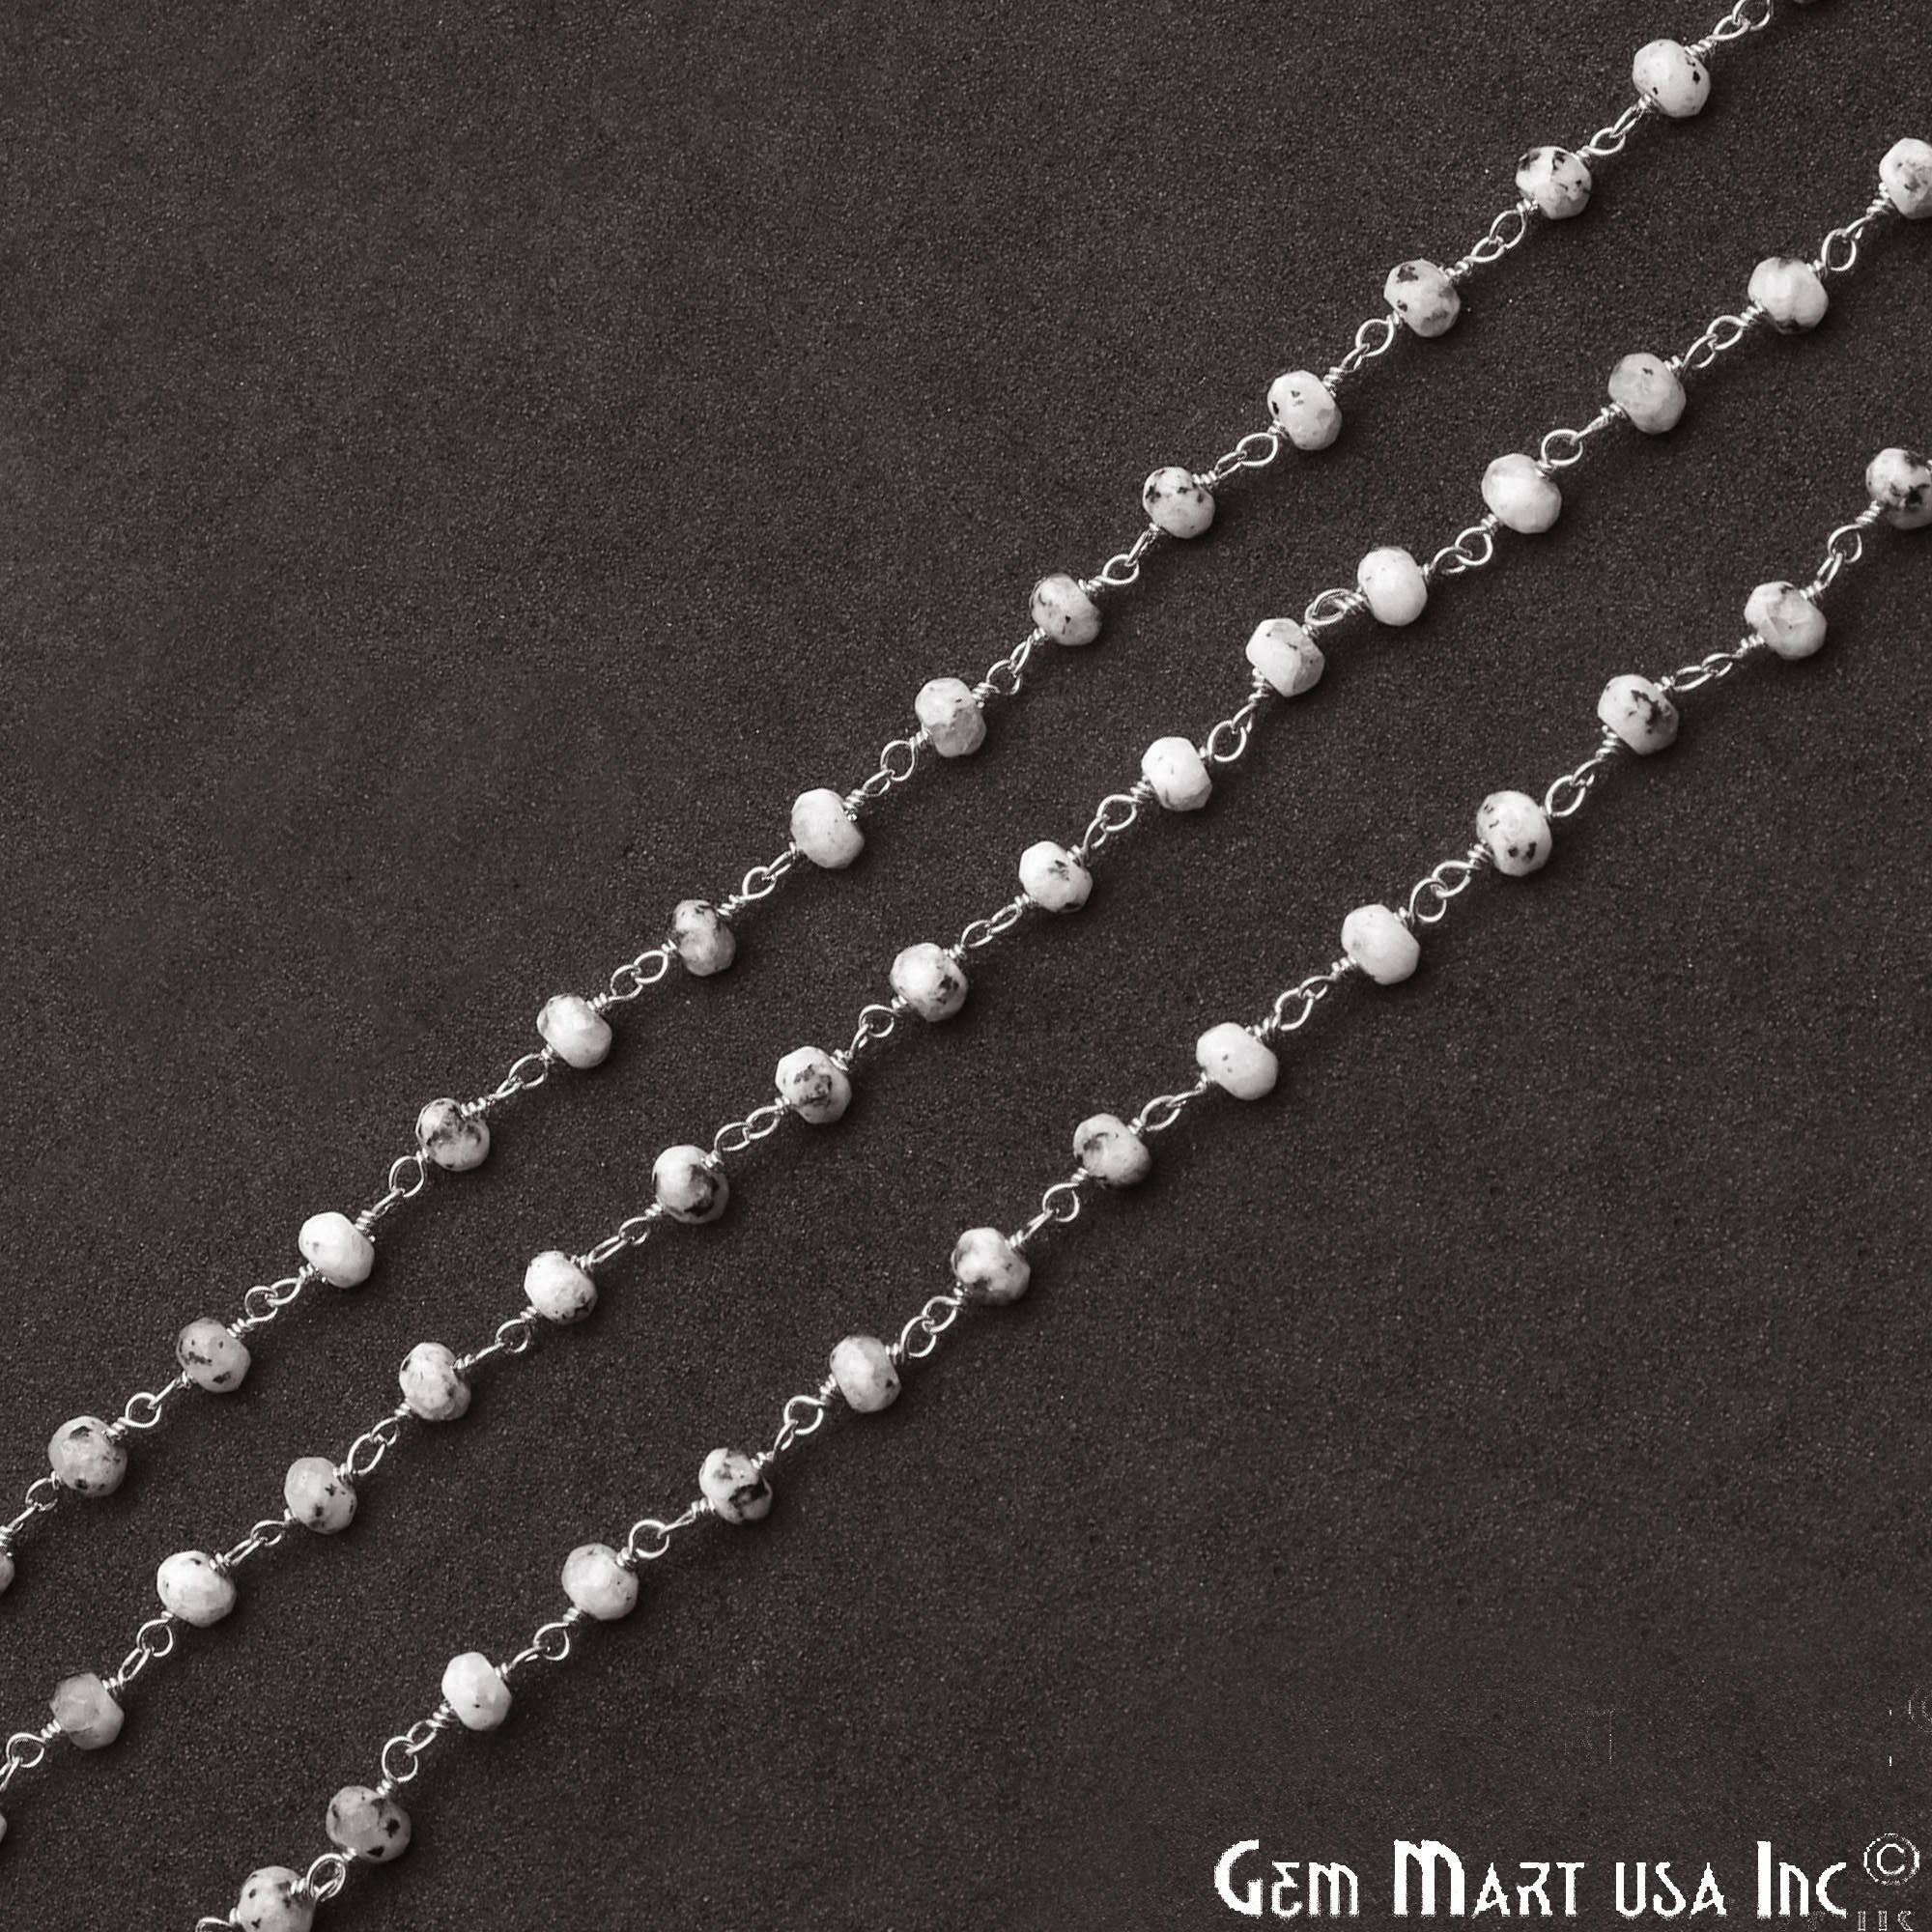 Dendrite Opal Jade Faceted Beads 4mm Oxidized Plated Wire Wrapped Rosary Chain - GemMartUSA